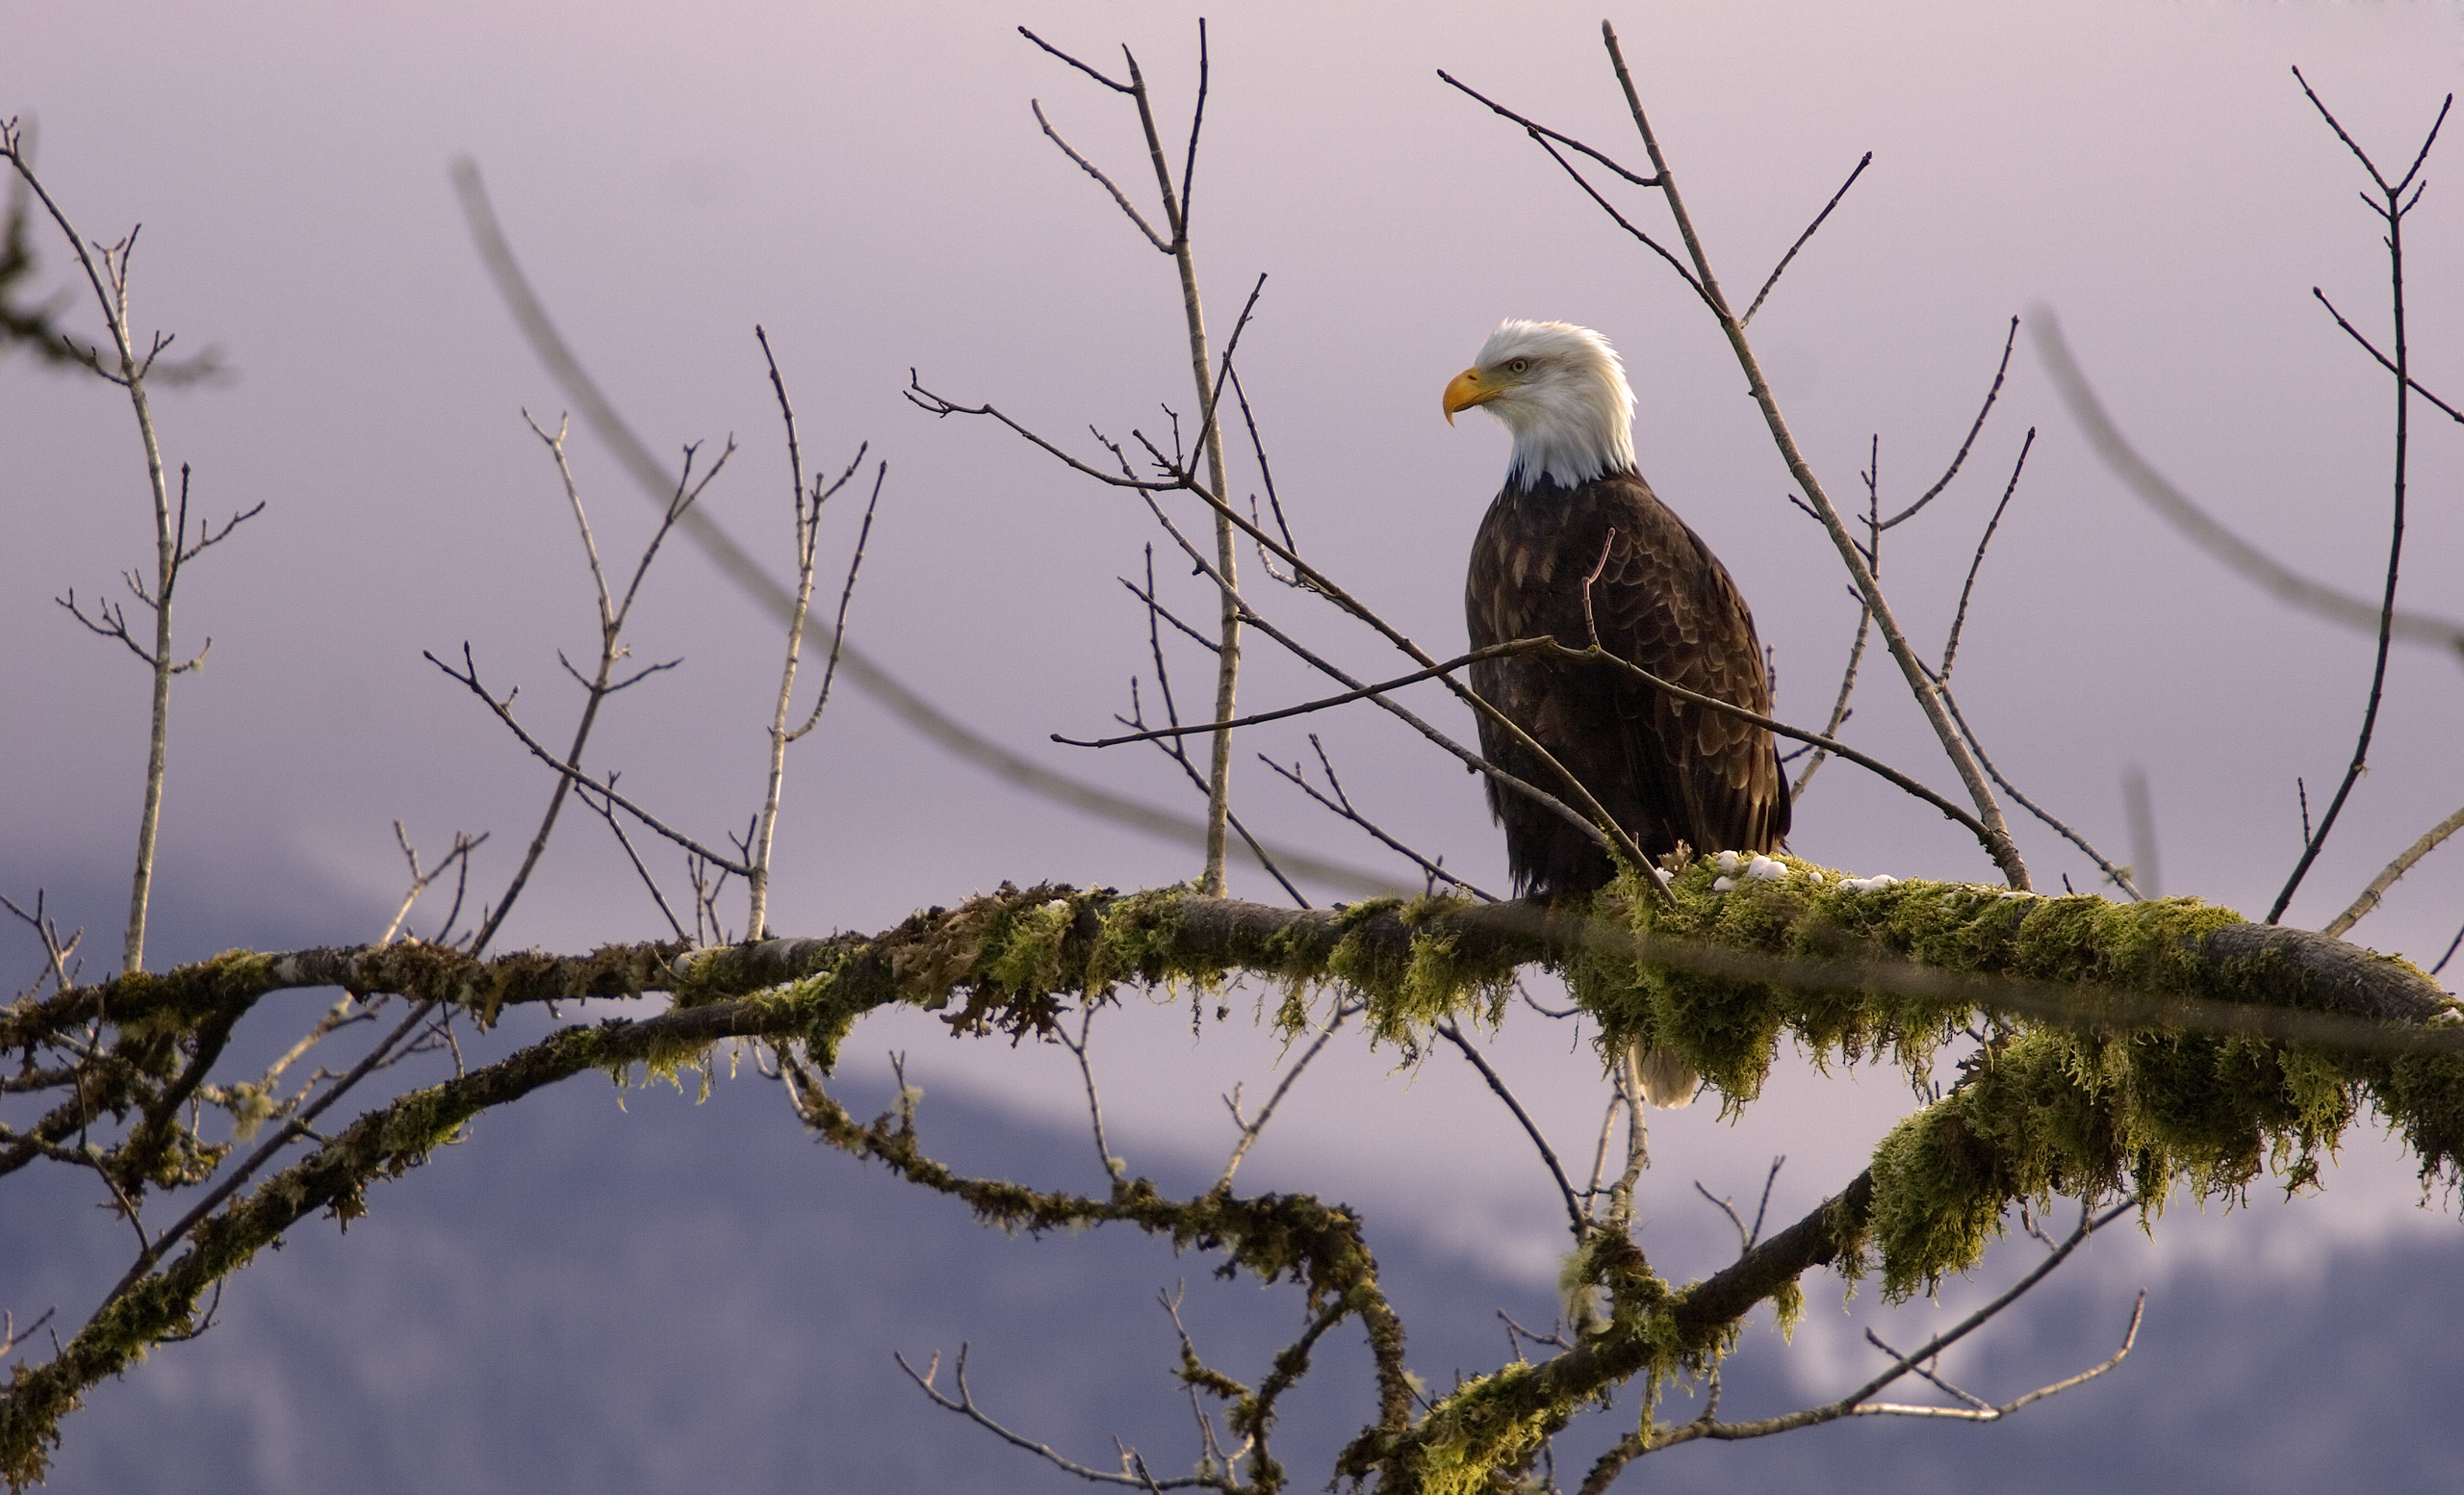 Animal: Eagle desktop wallpaper. A soaring bird of prey with majestic wings against a scenic backdrop.